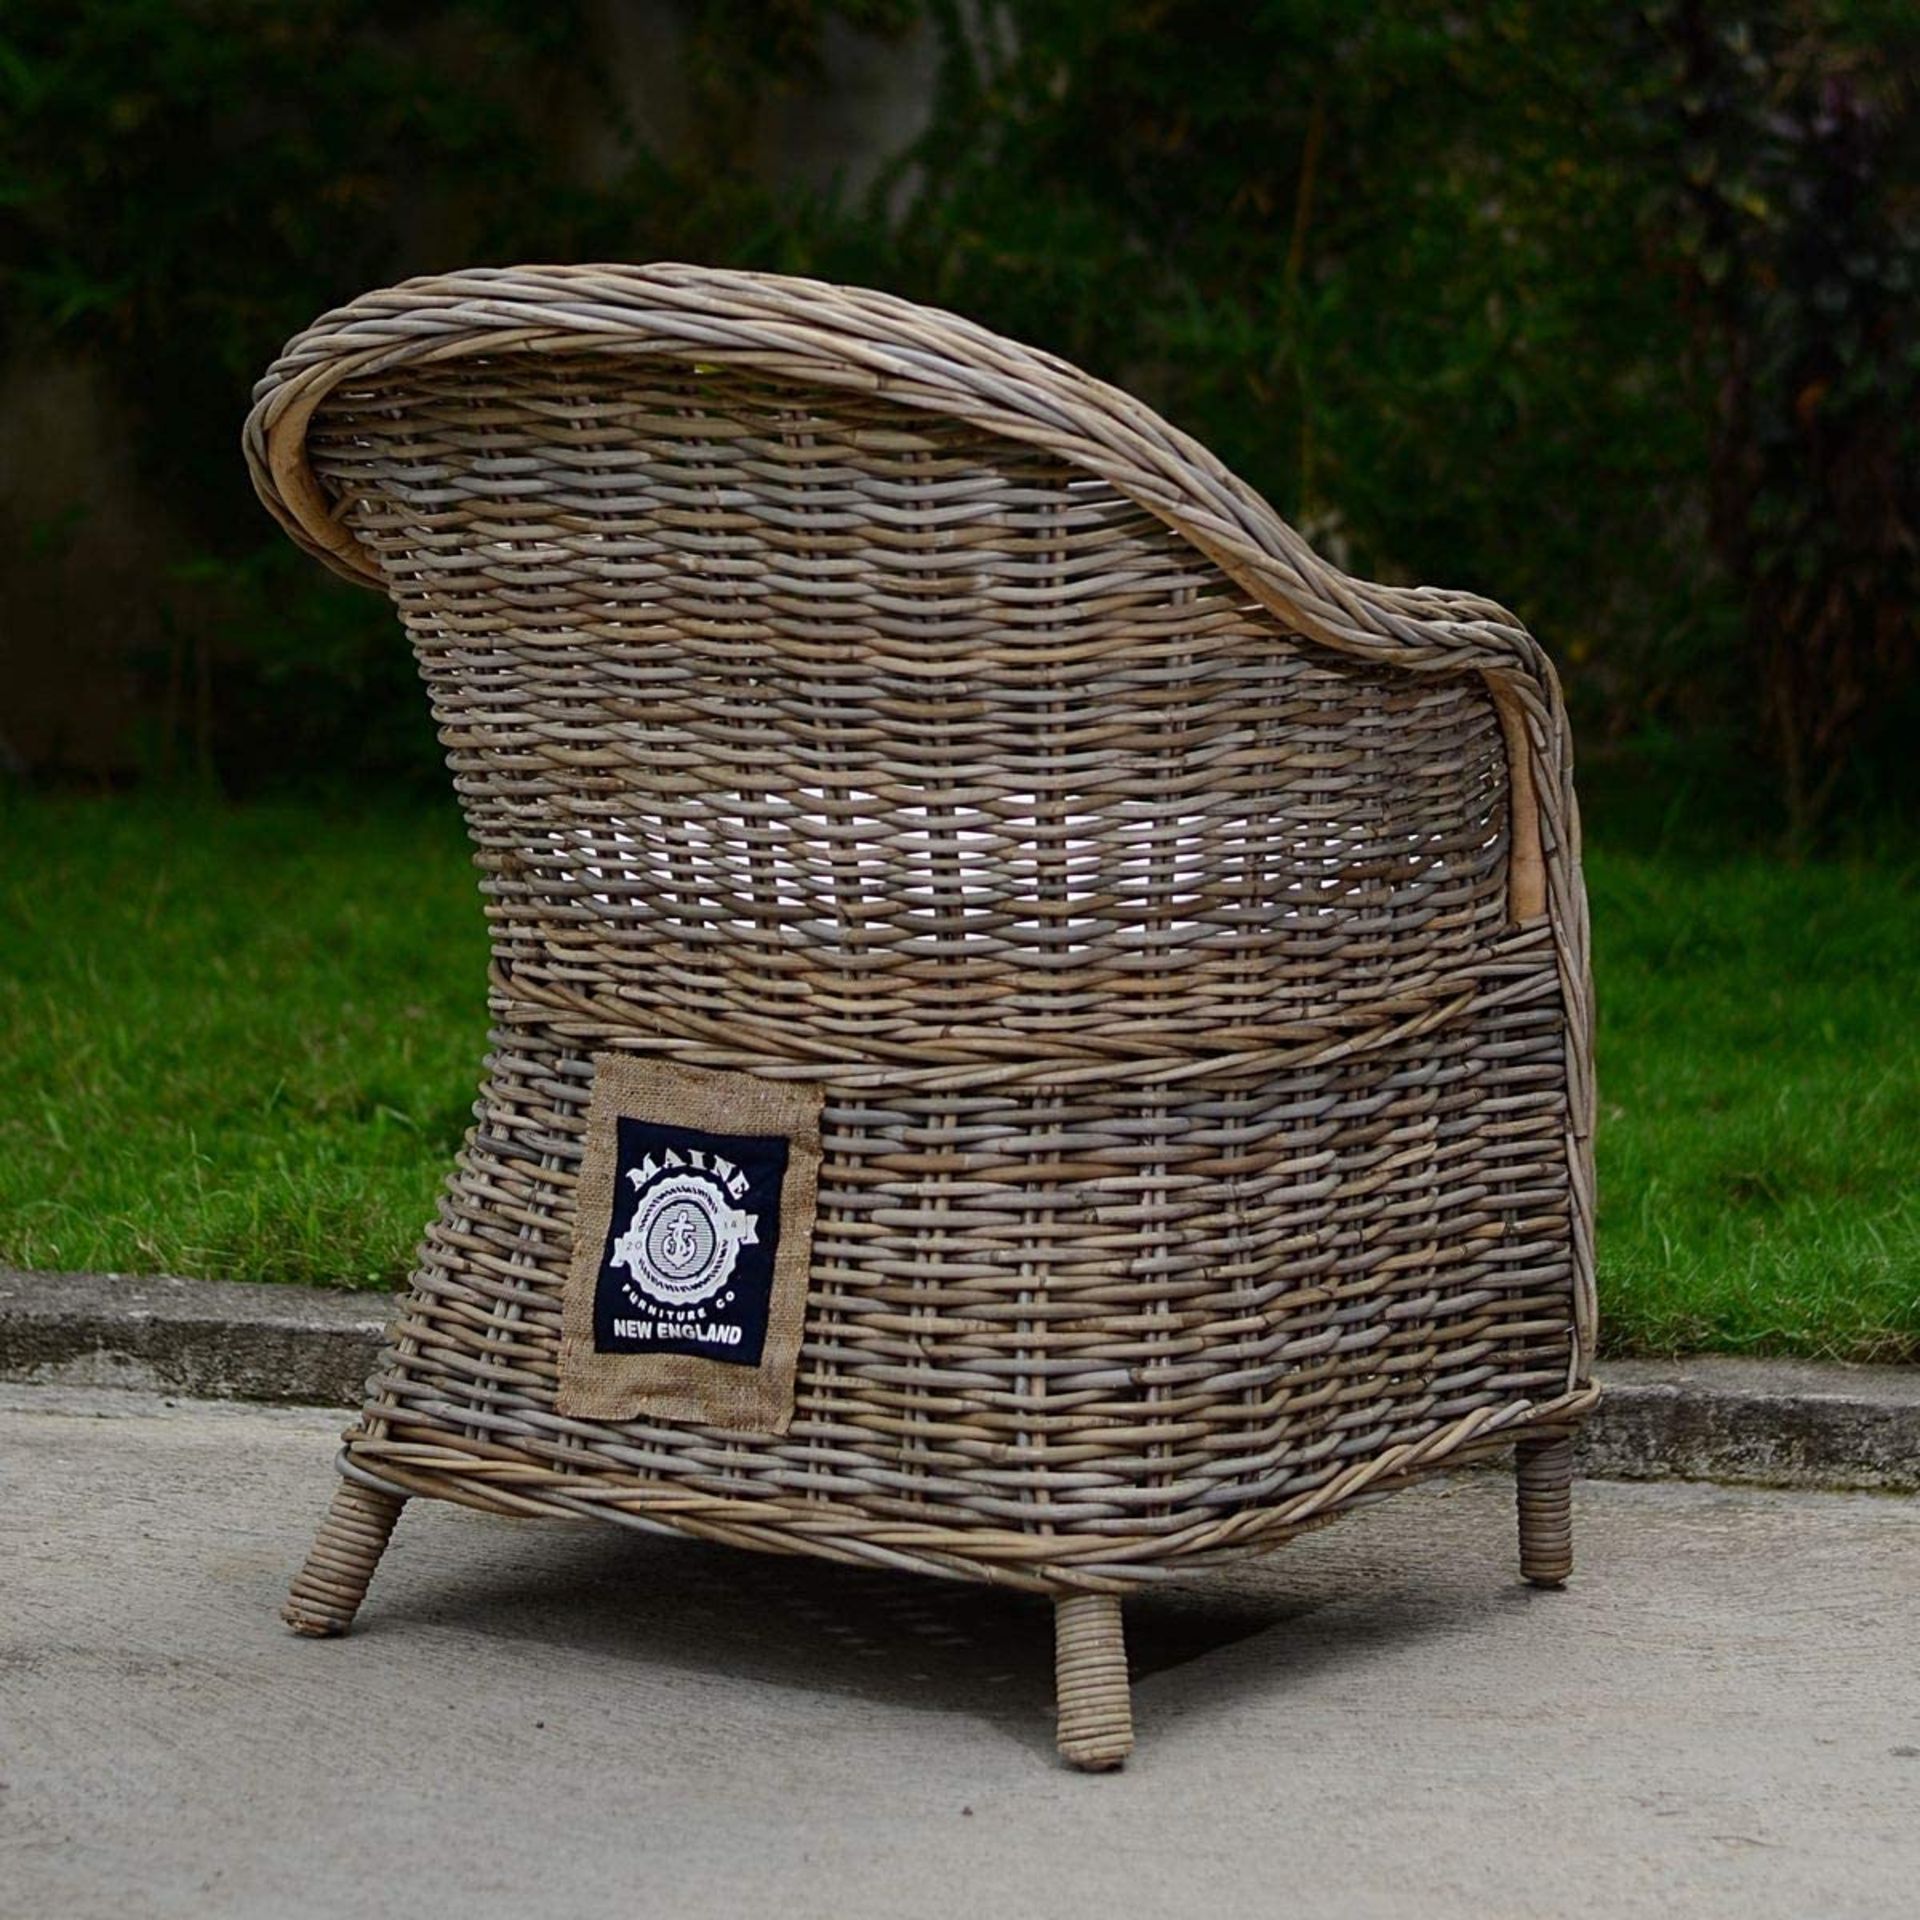 NEW & BOXED 2x Maine Furniture Co. Kubu Rattan Armchair with Cushion. (SR5). (SKU: M500156). STRONG, - Image 3 of 6